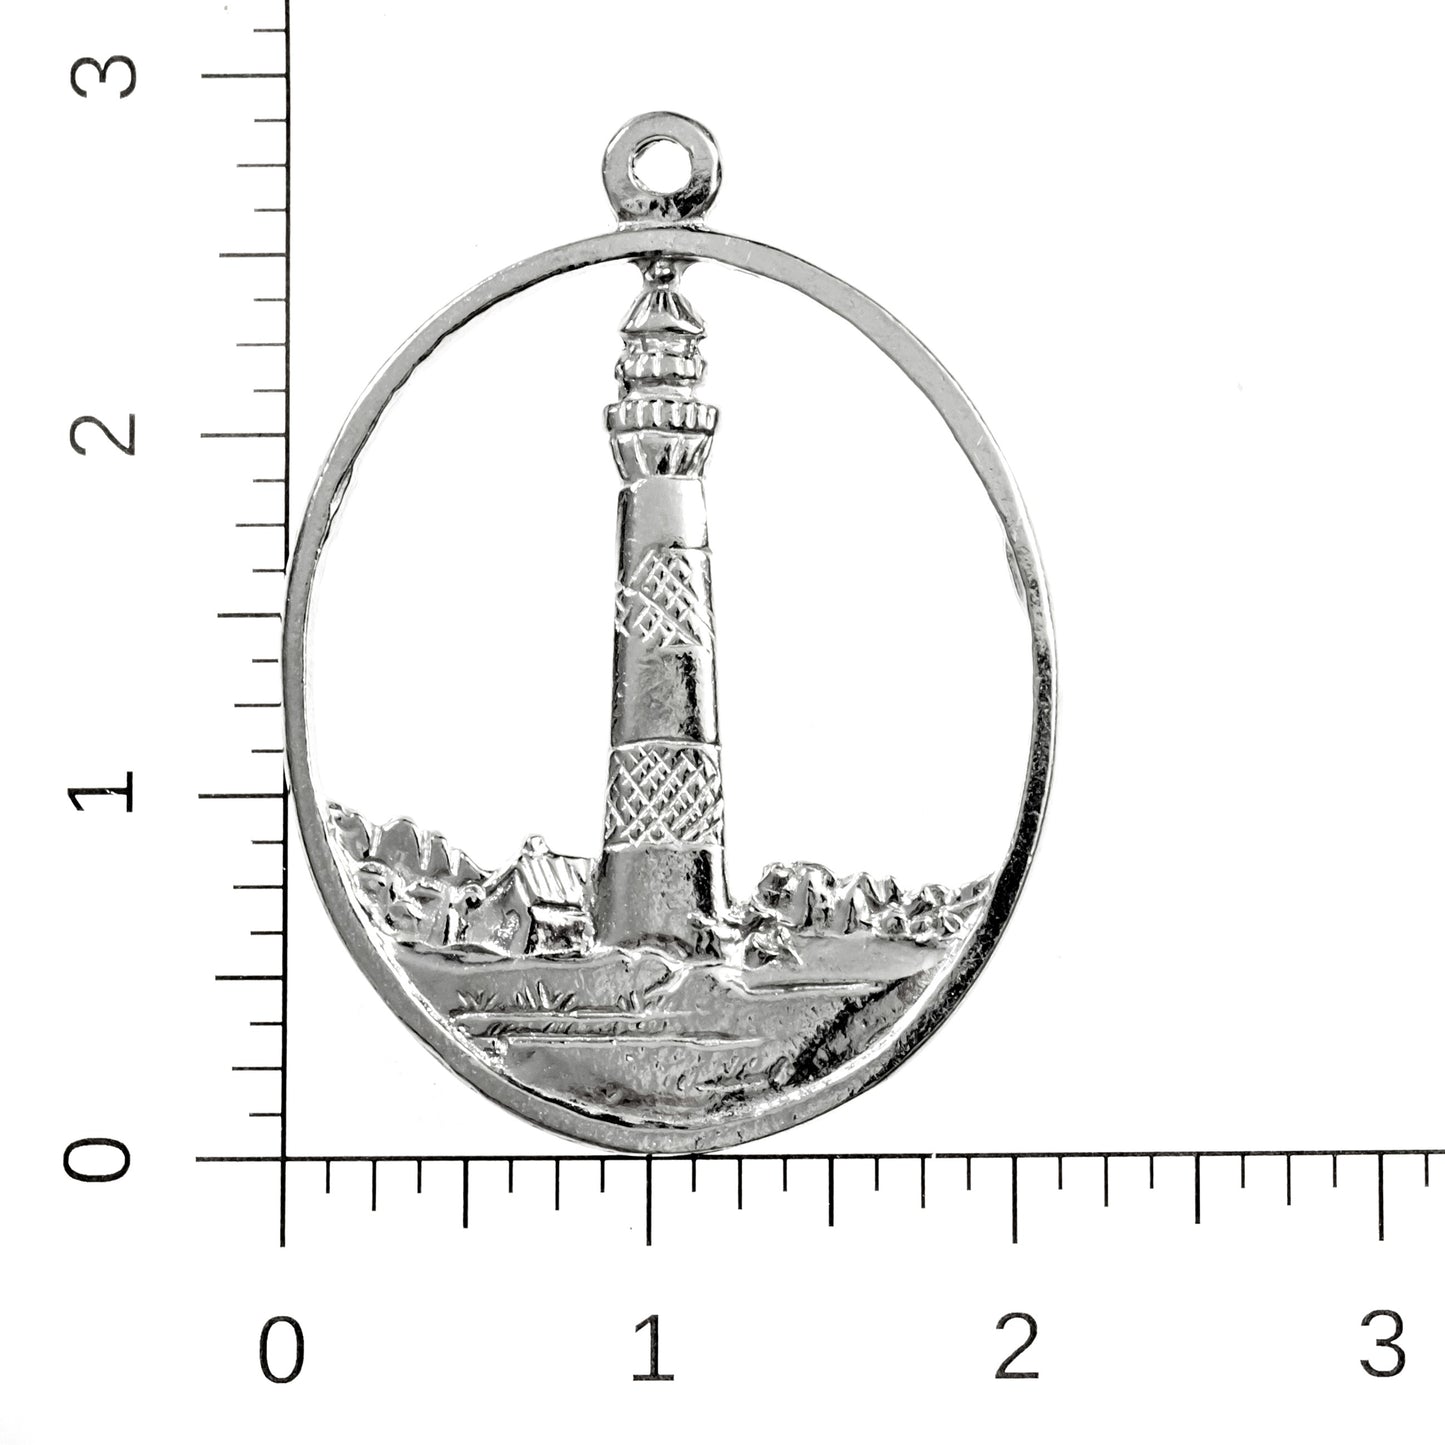 Lighthouse Gifts - North Carolina Lighthouses Ornaments - Individual or Gift Set